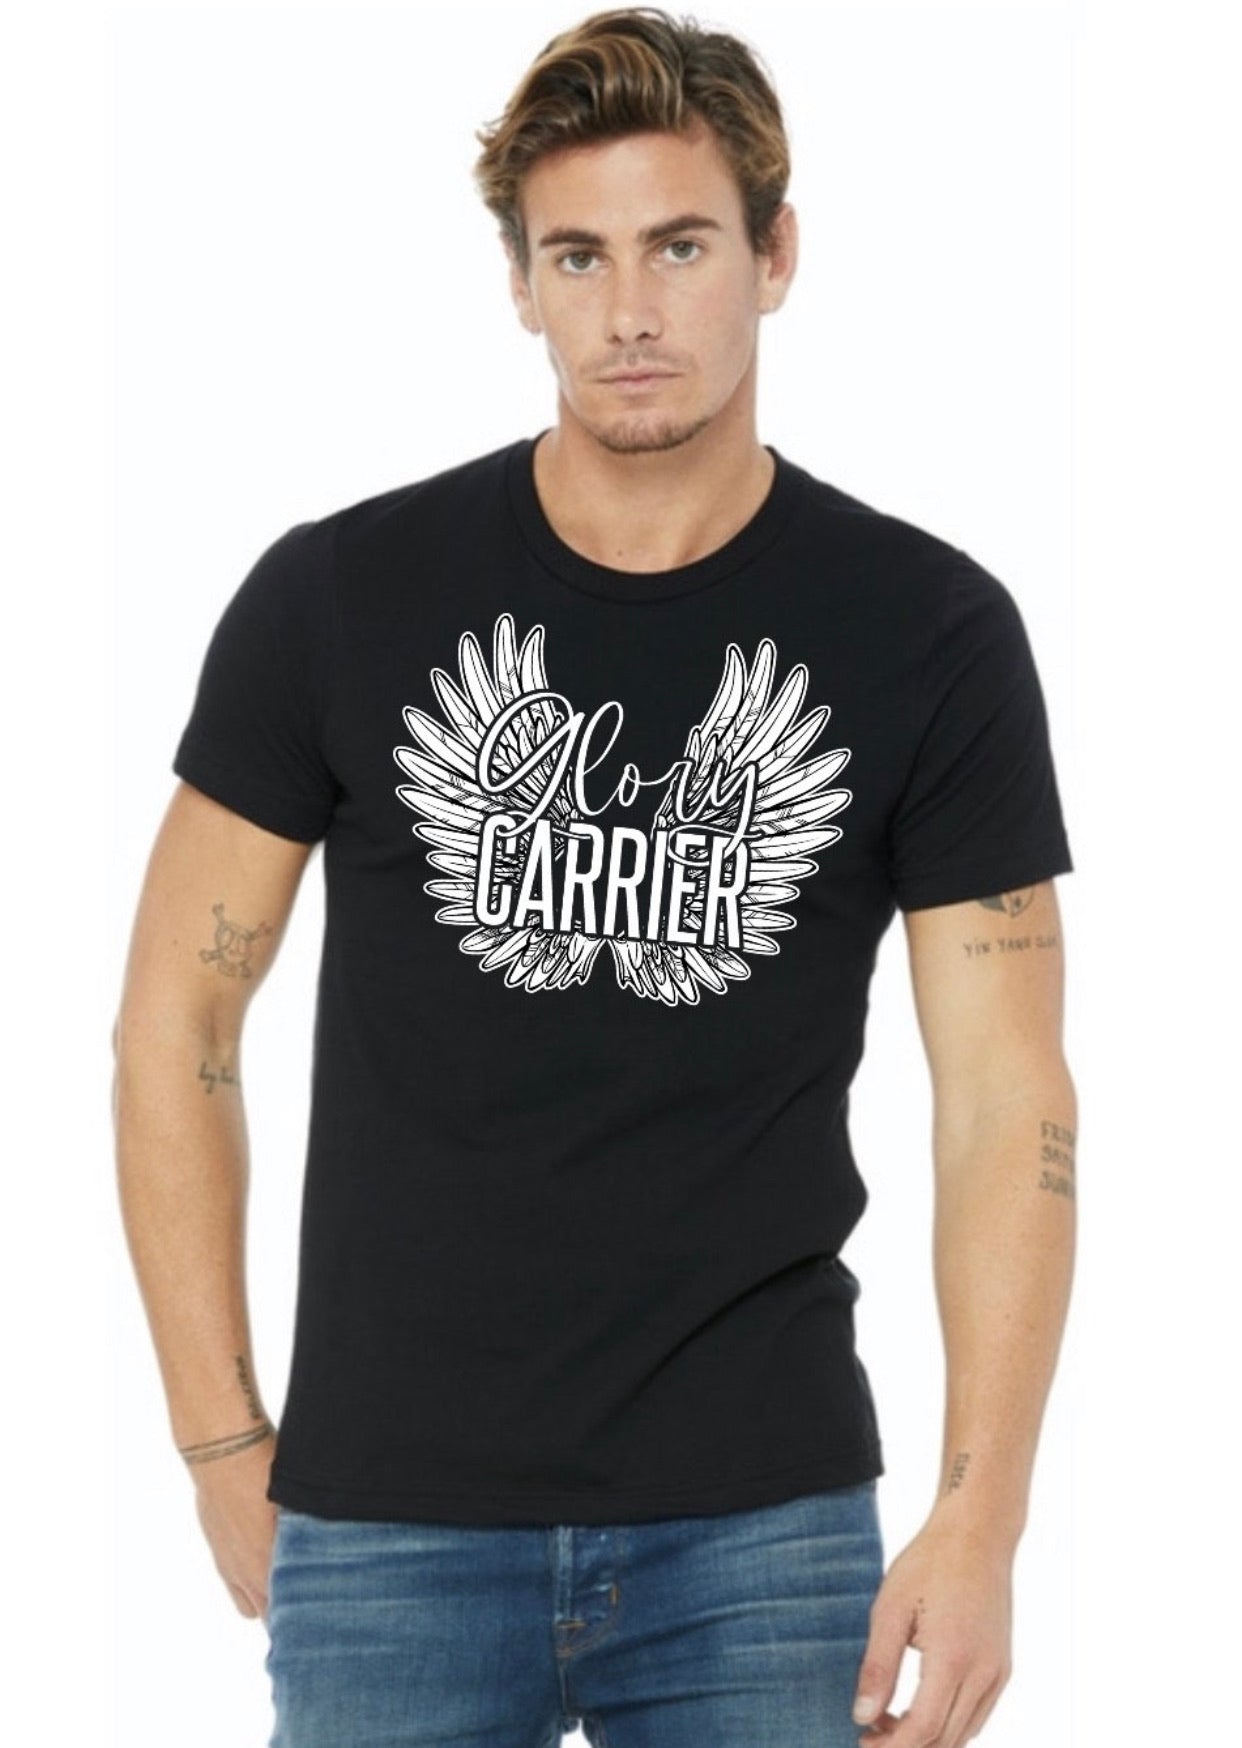 Glory Carrier Black Tee – Clothed in Grace